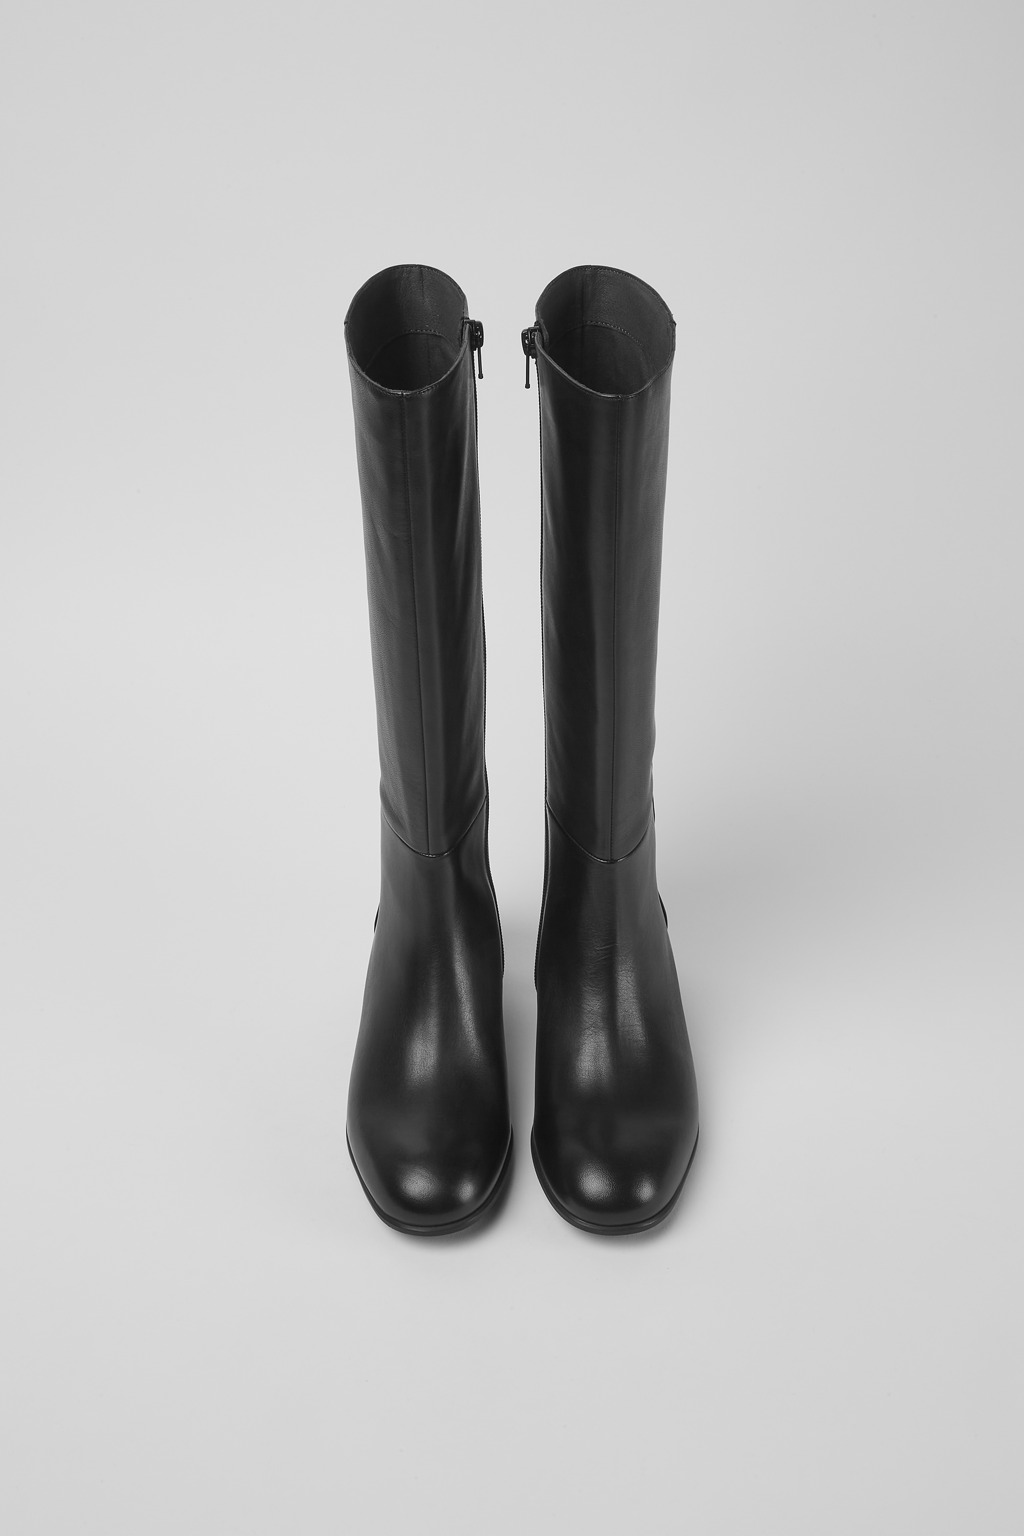 katie Black Boots for Women - Fall/Winter collection - Camper Canada